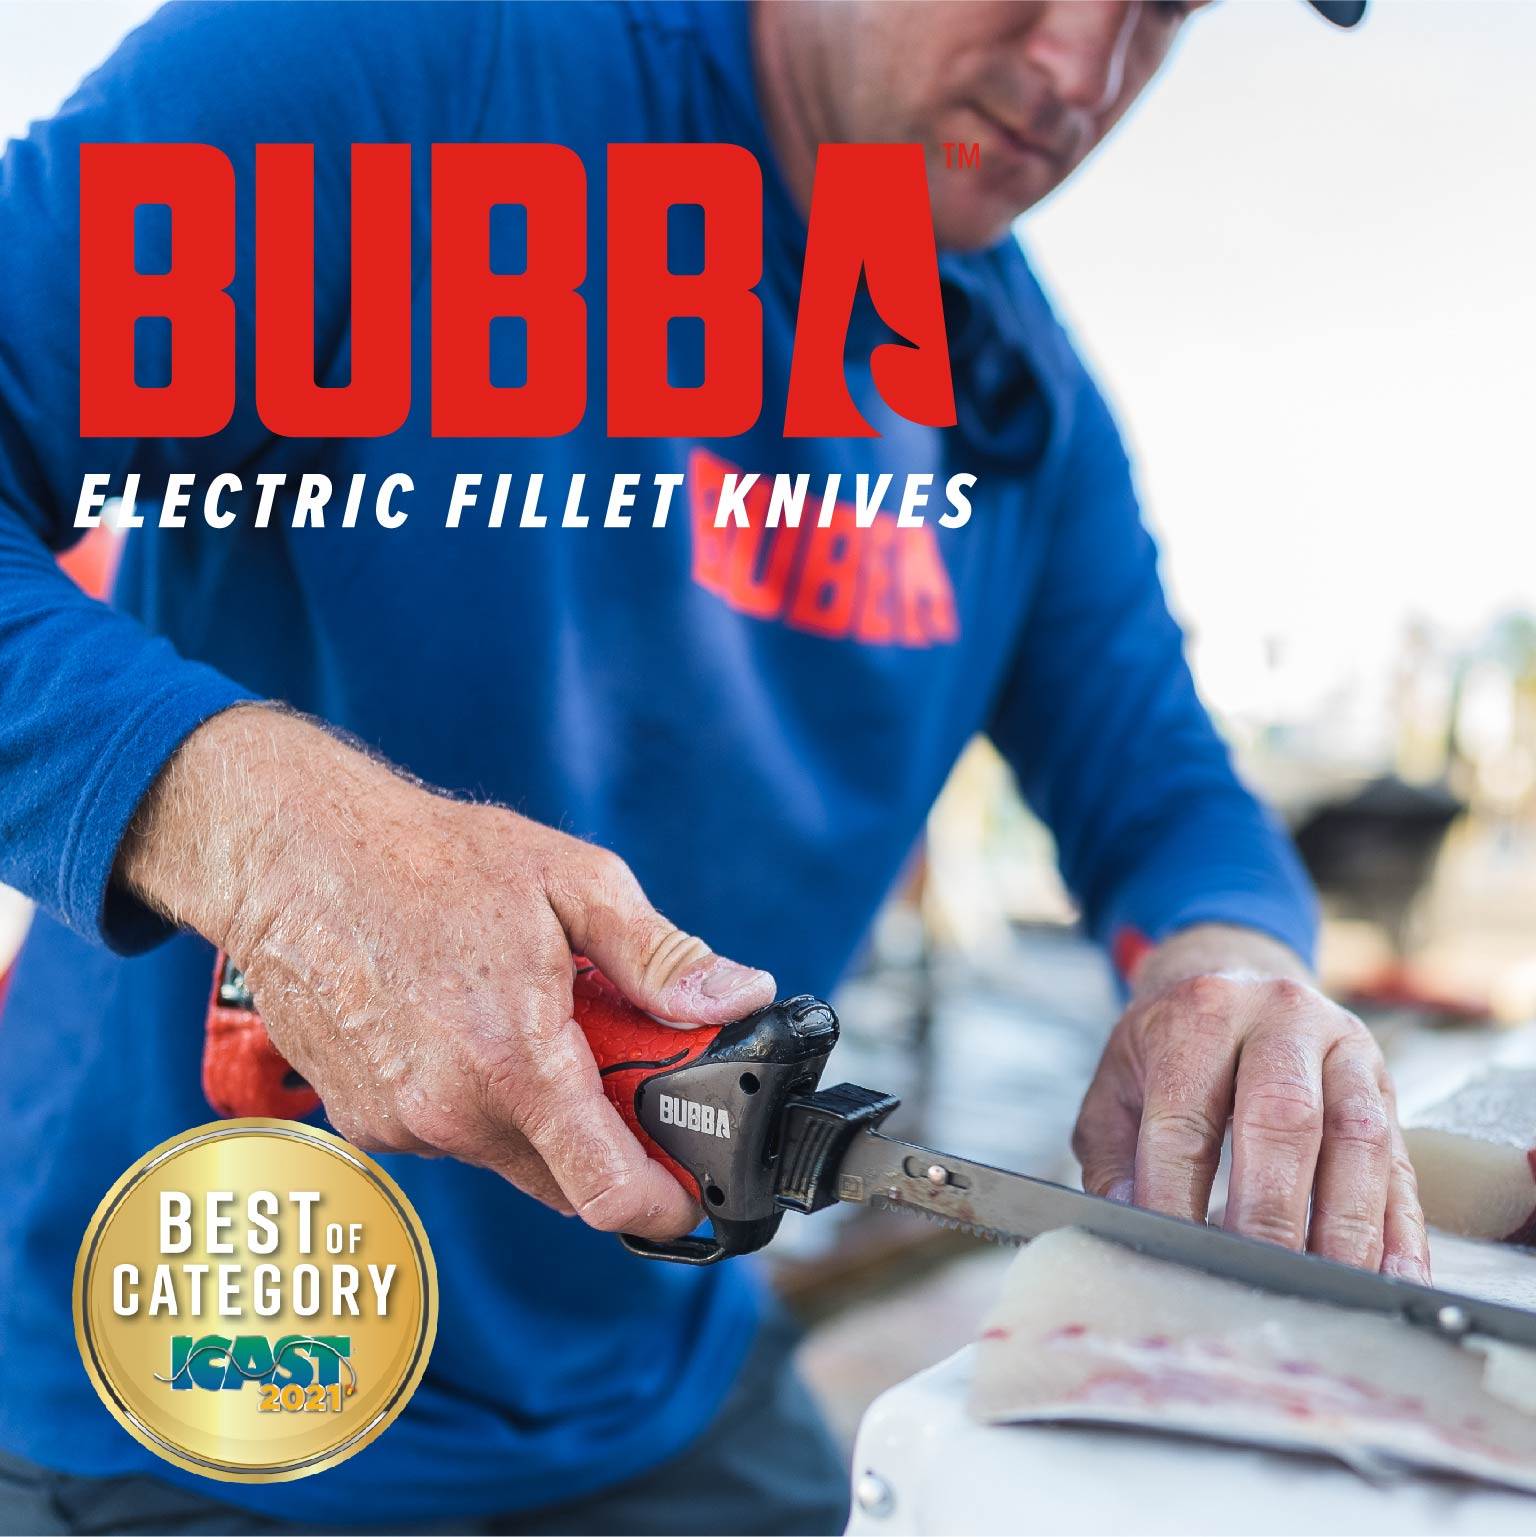 BUBBA - The Pro Series Electric Fillet Knife boasts